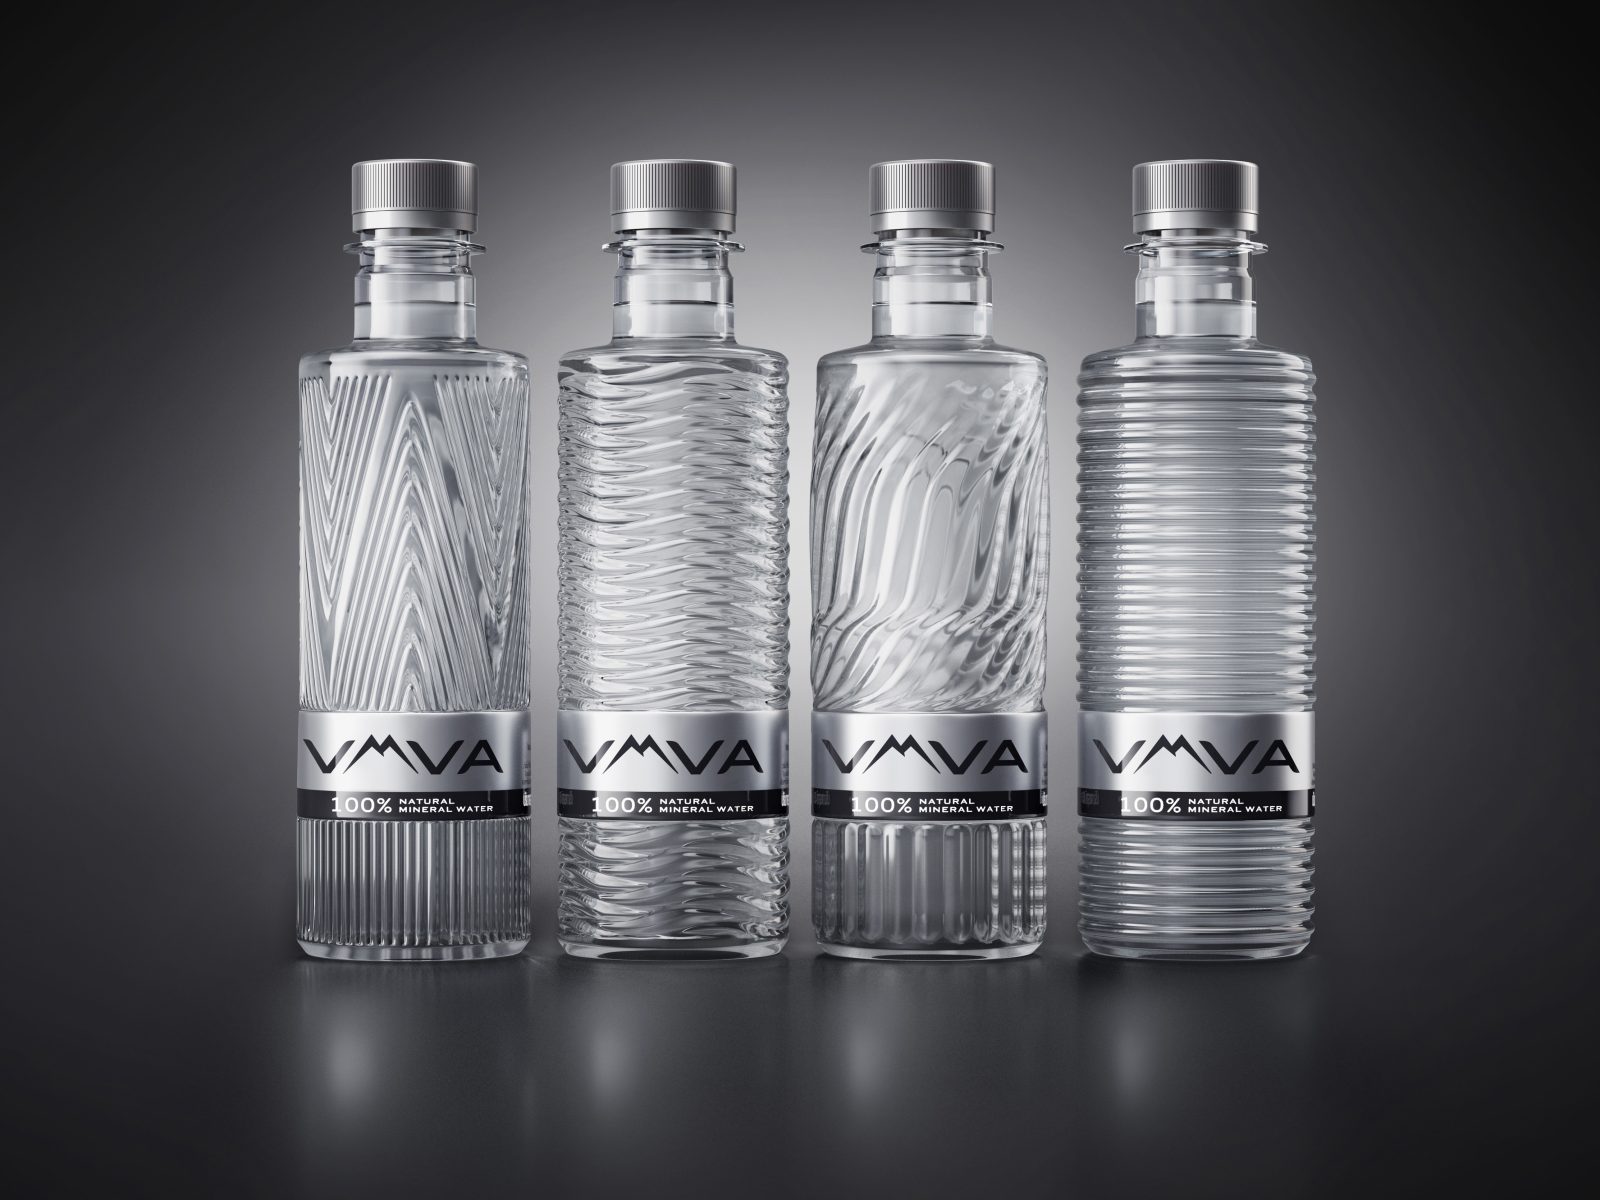 VAVA Mineral Water Packaging Design Creation